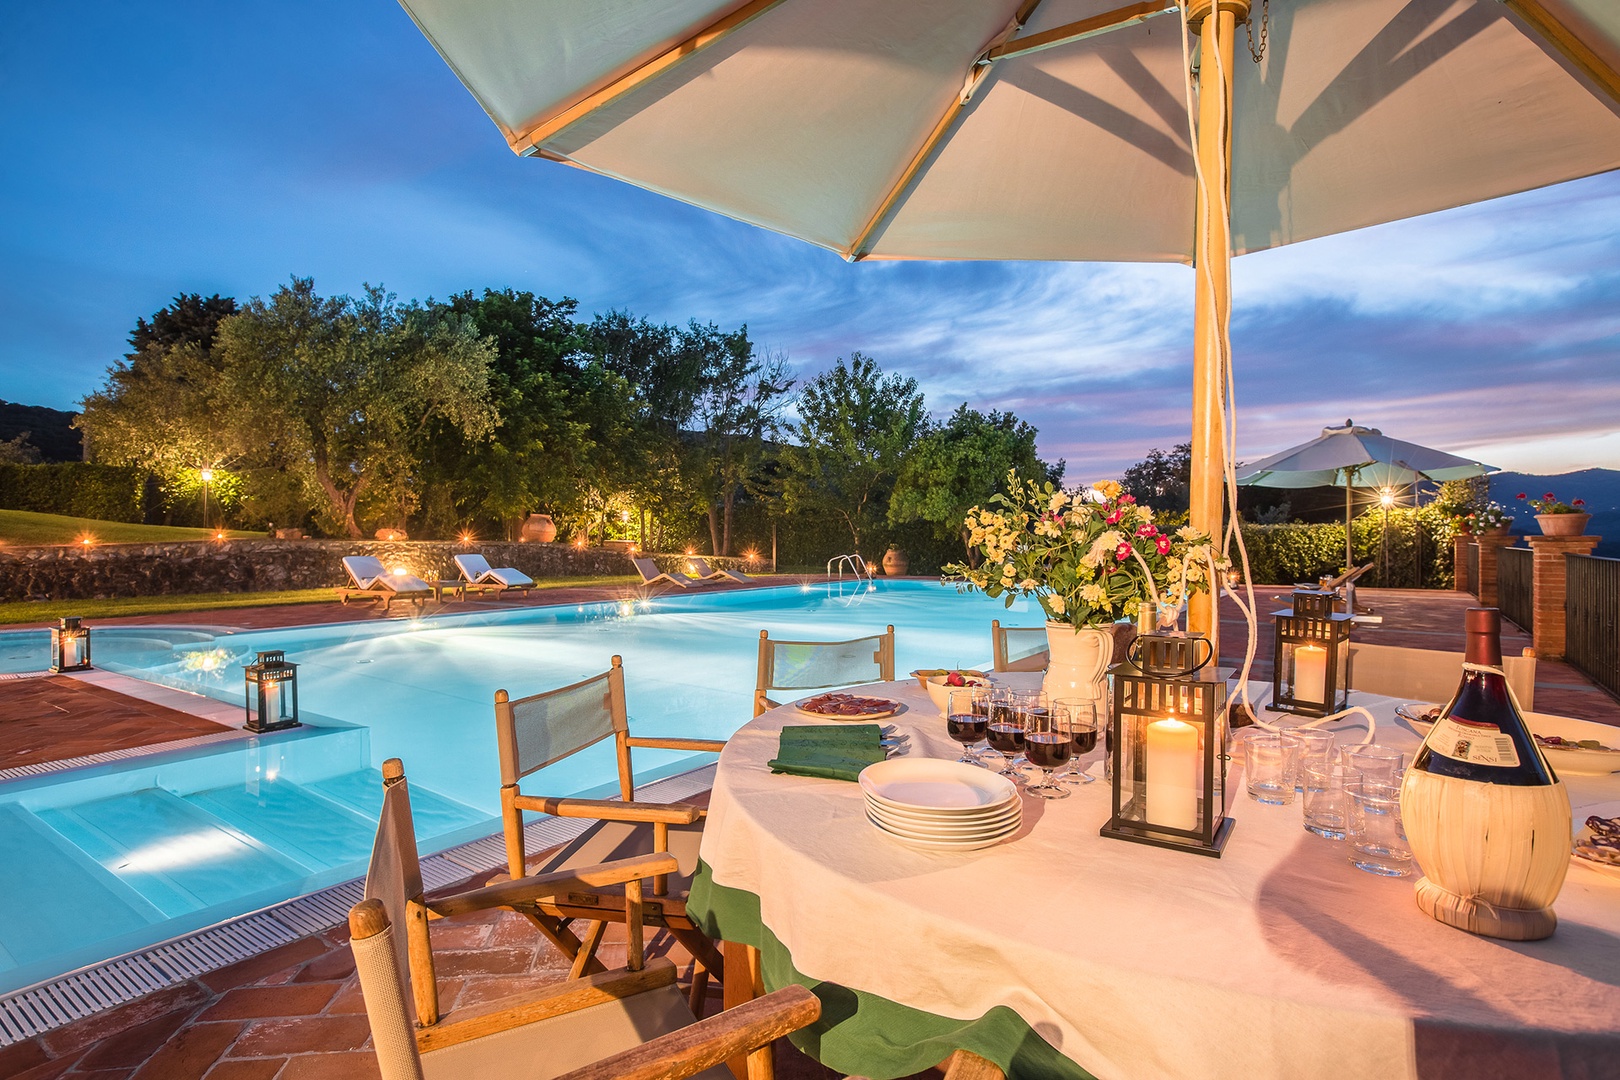 Al fresco dining in this beautiful poolside setting.